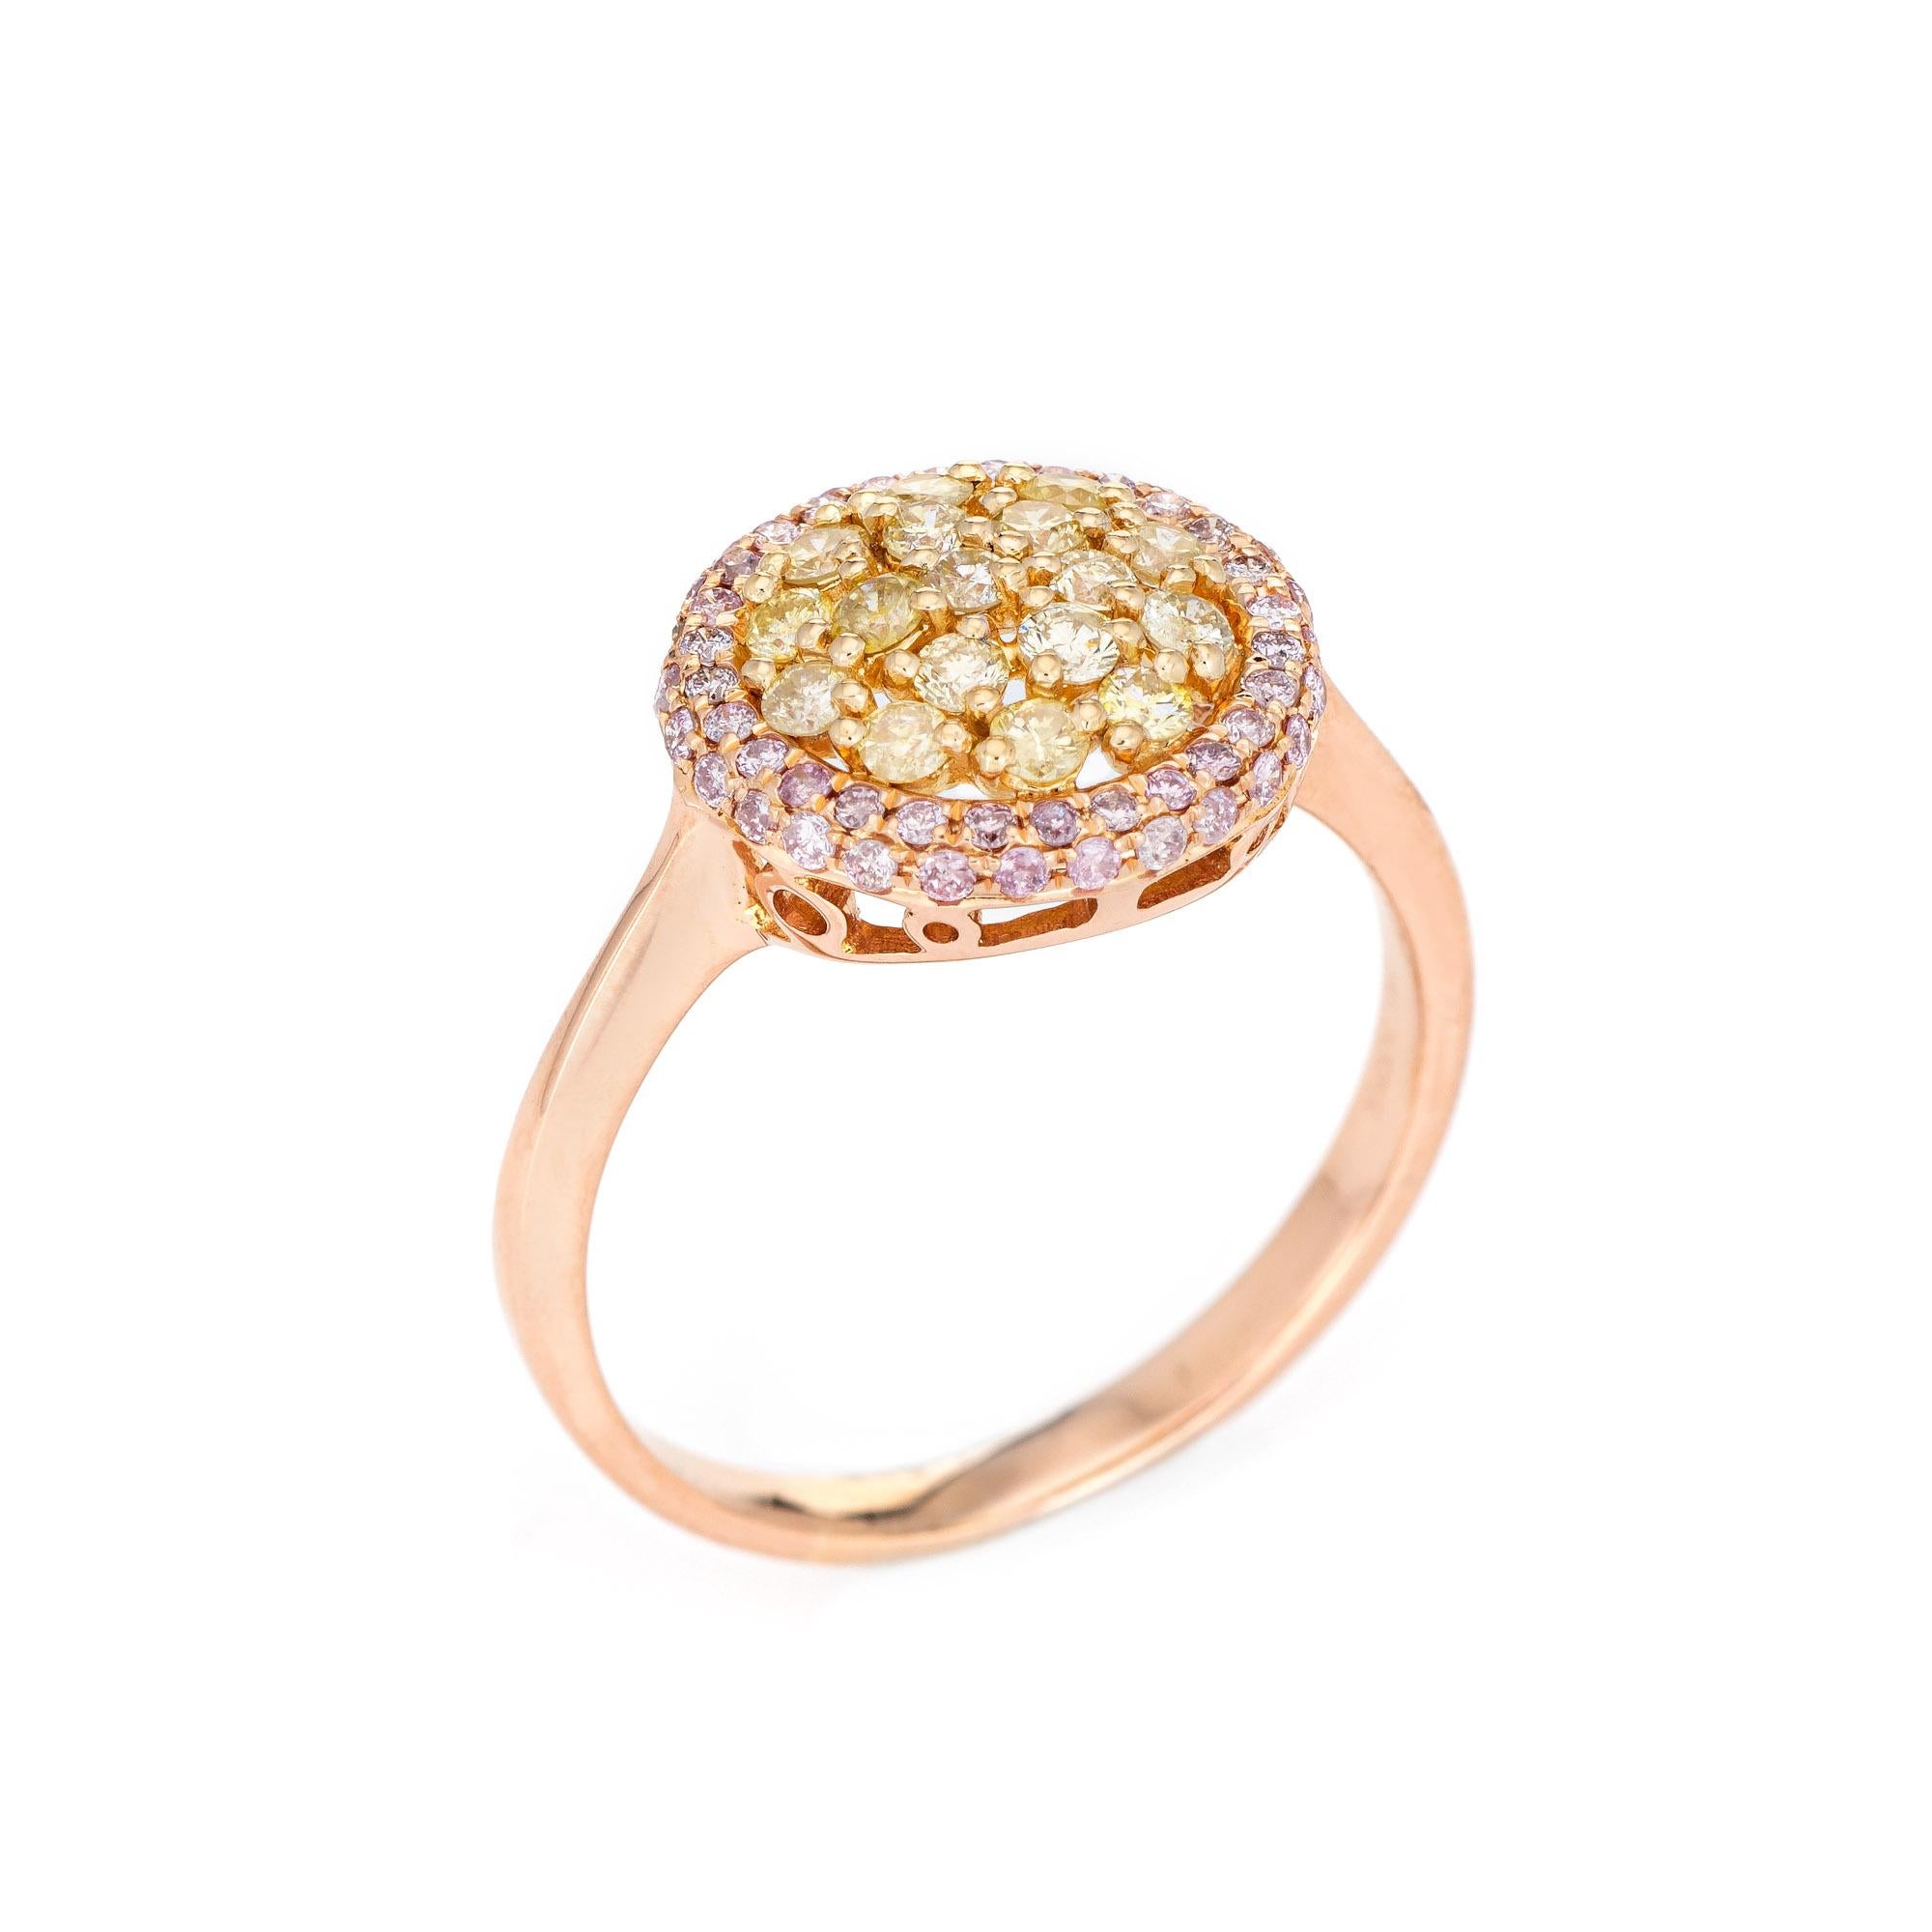 Stylish pink & yellow diamond ring crafted in 18 karat rose gold. 

17 yellow diamonds total an estimated 0.60 carats, accented with 55 pink diamonds totaling an estimated 0.27 carats. The diamonds are estimated at SI1-2 clarity.  

The halo ring